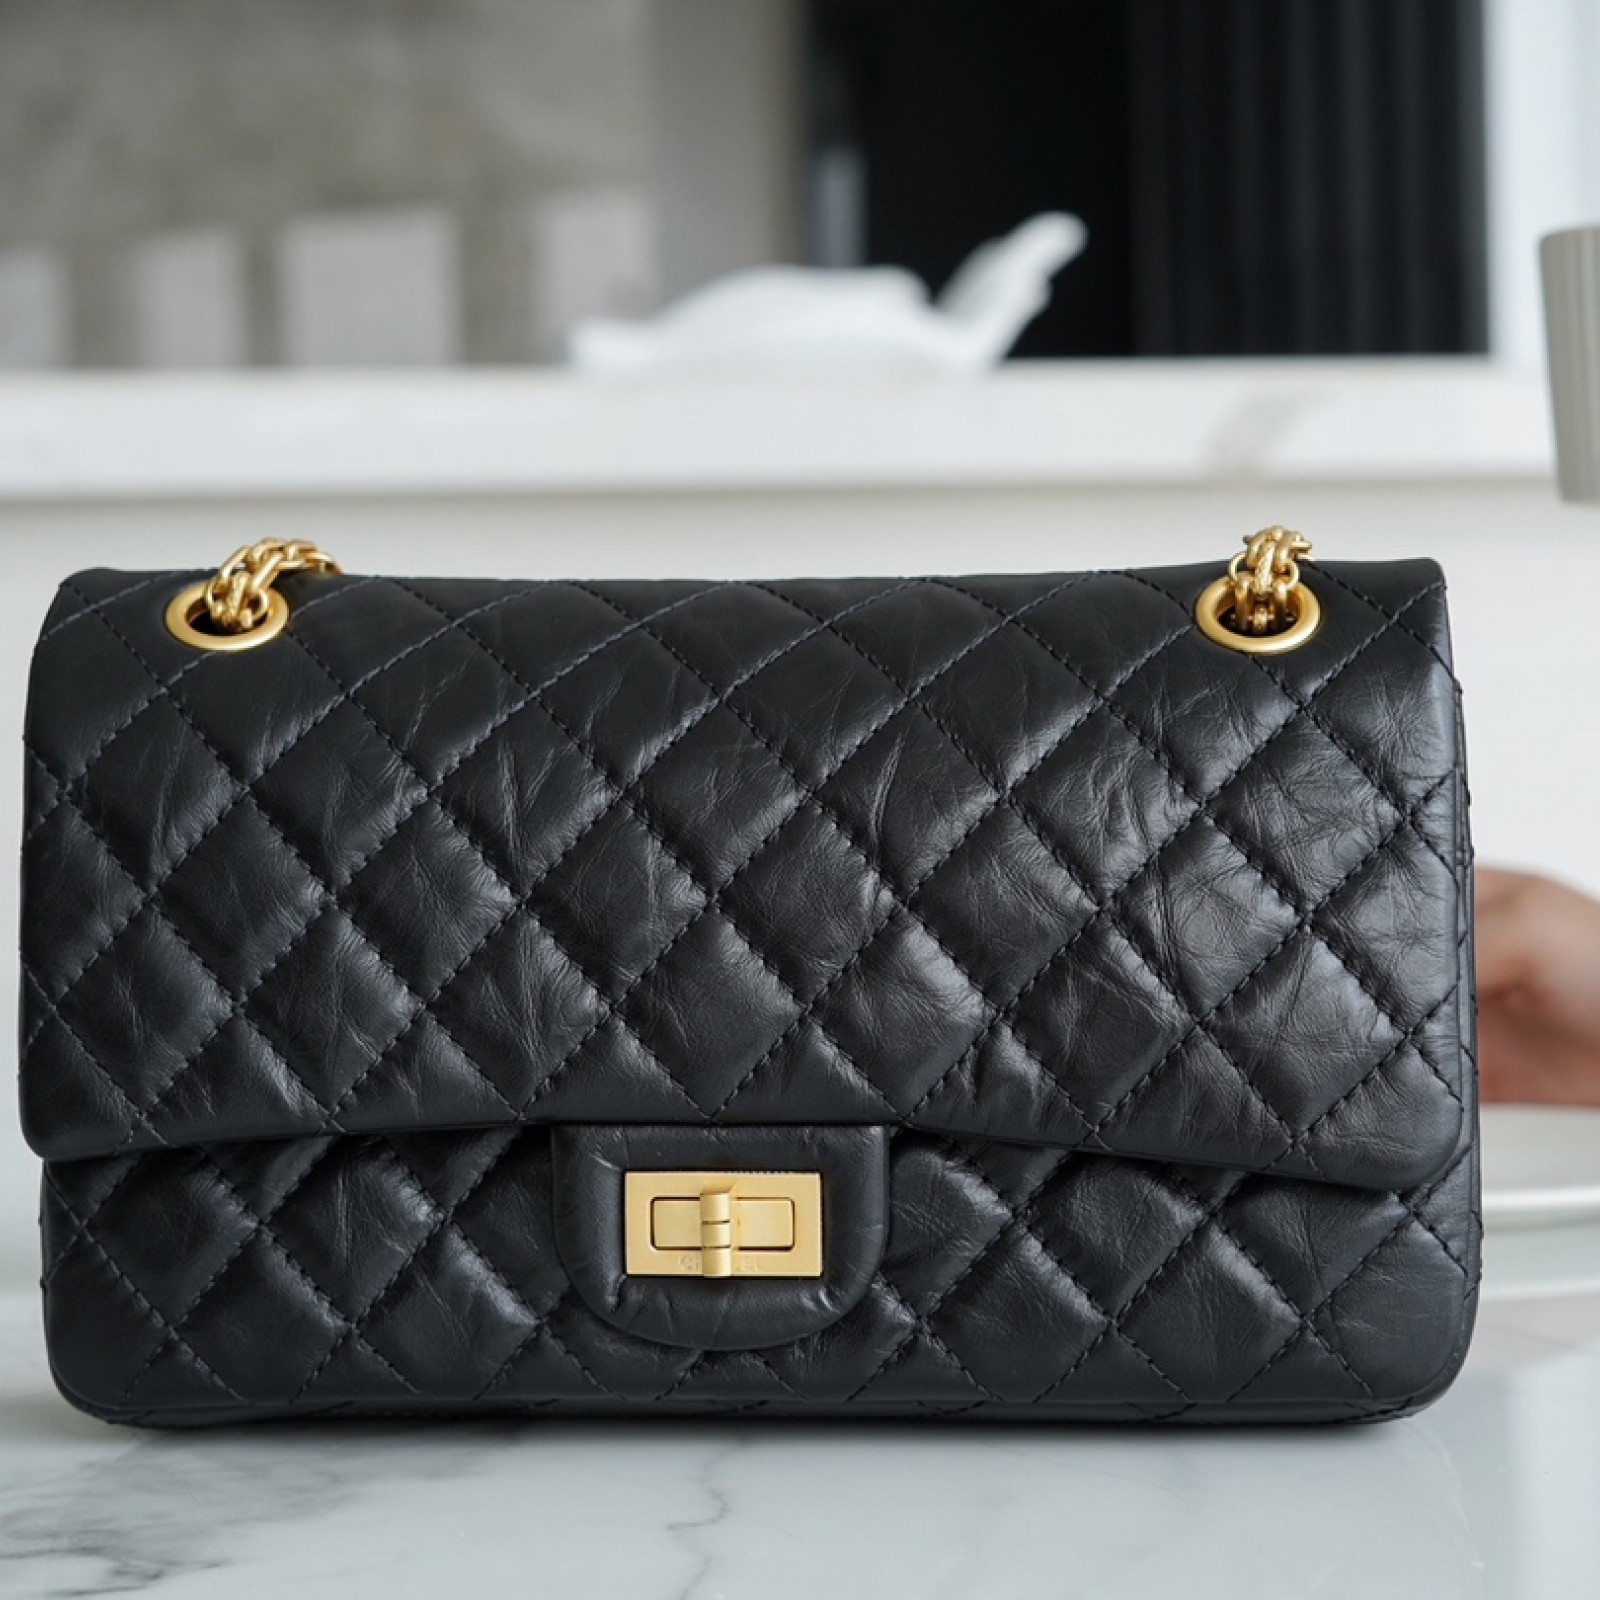 CHANEL 2.55 SMALL FLAP BAG 